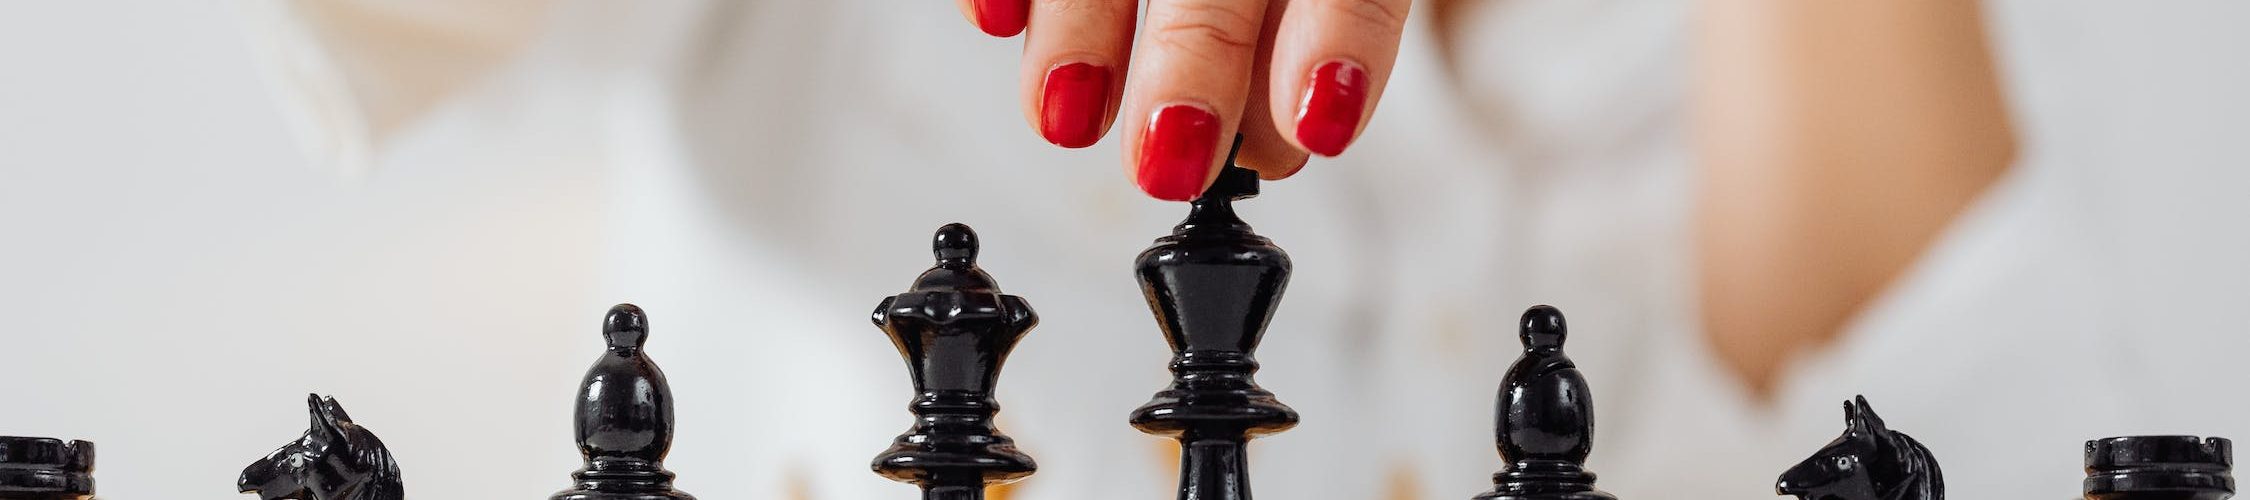 A hand with red nail polish over a chess piece, on a chess board.